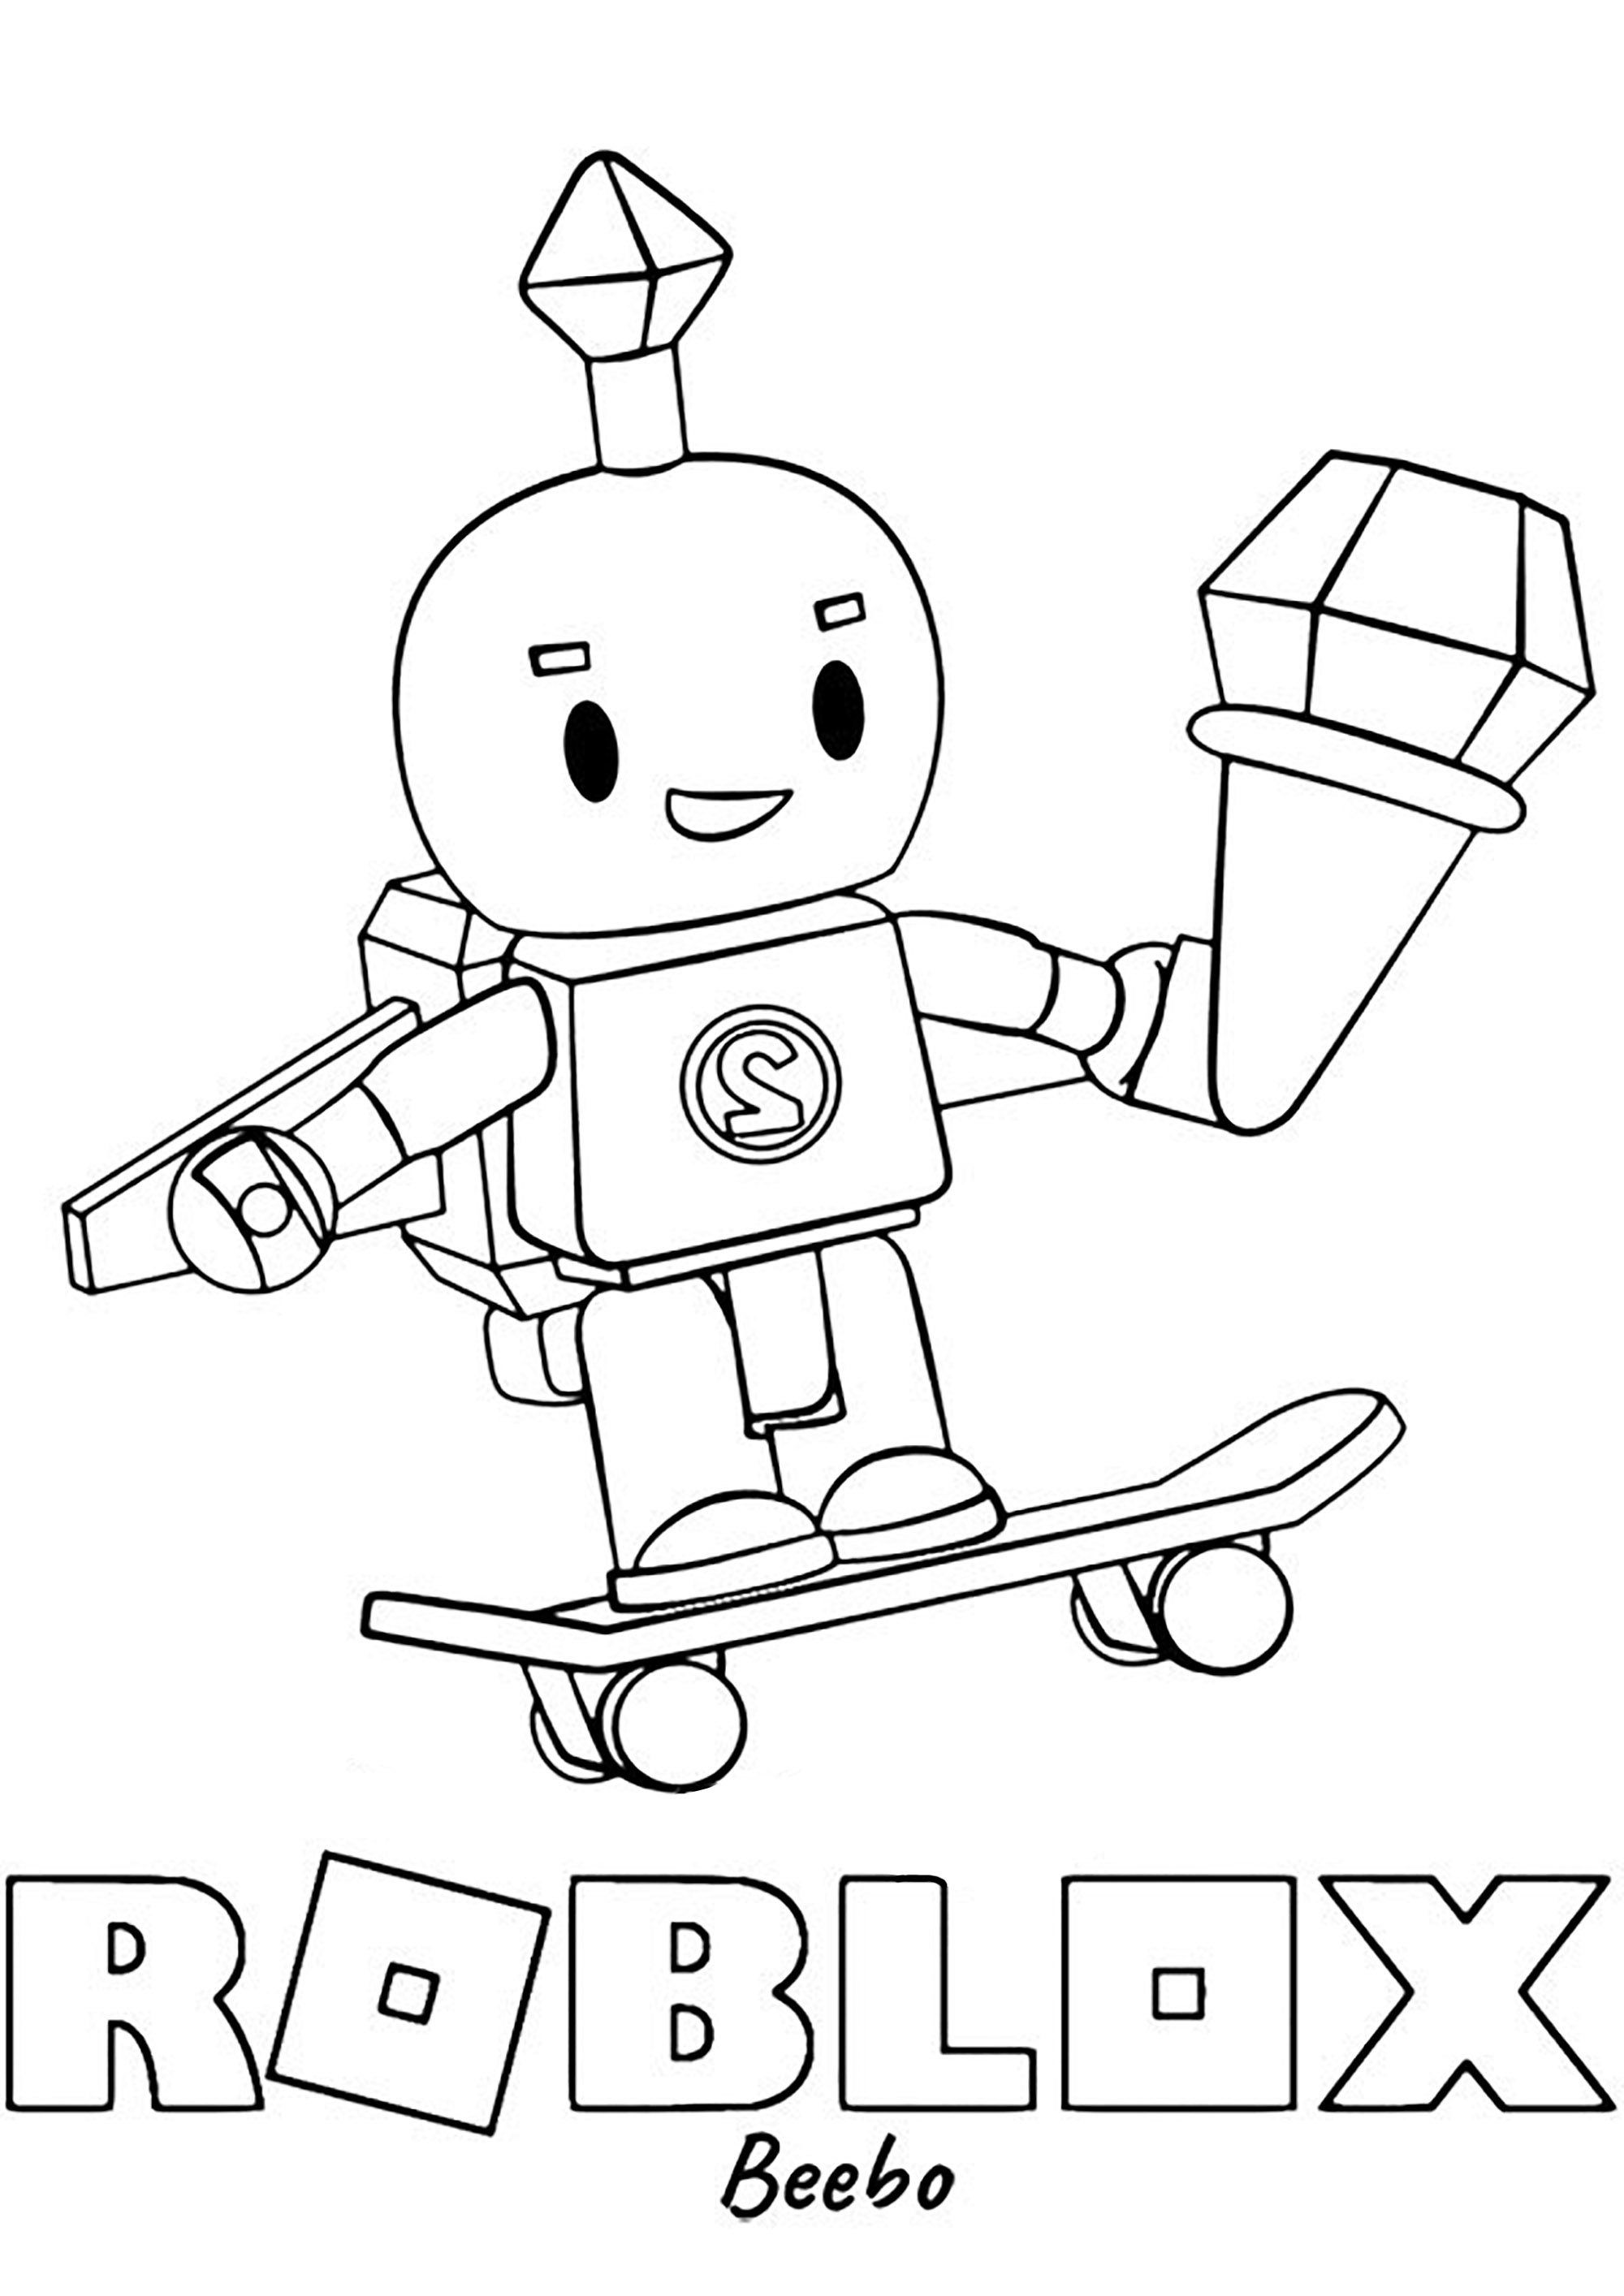 Roblox : Beebo - Roblox Kids Coloring Pages